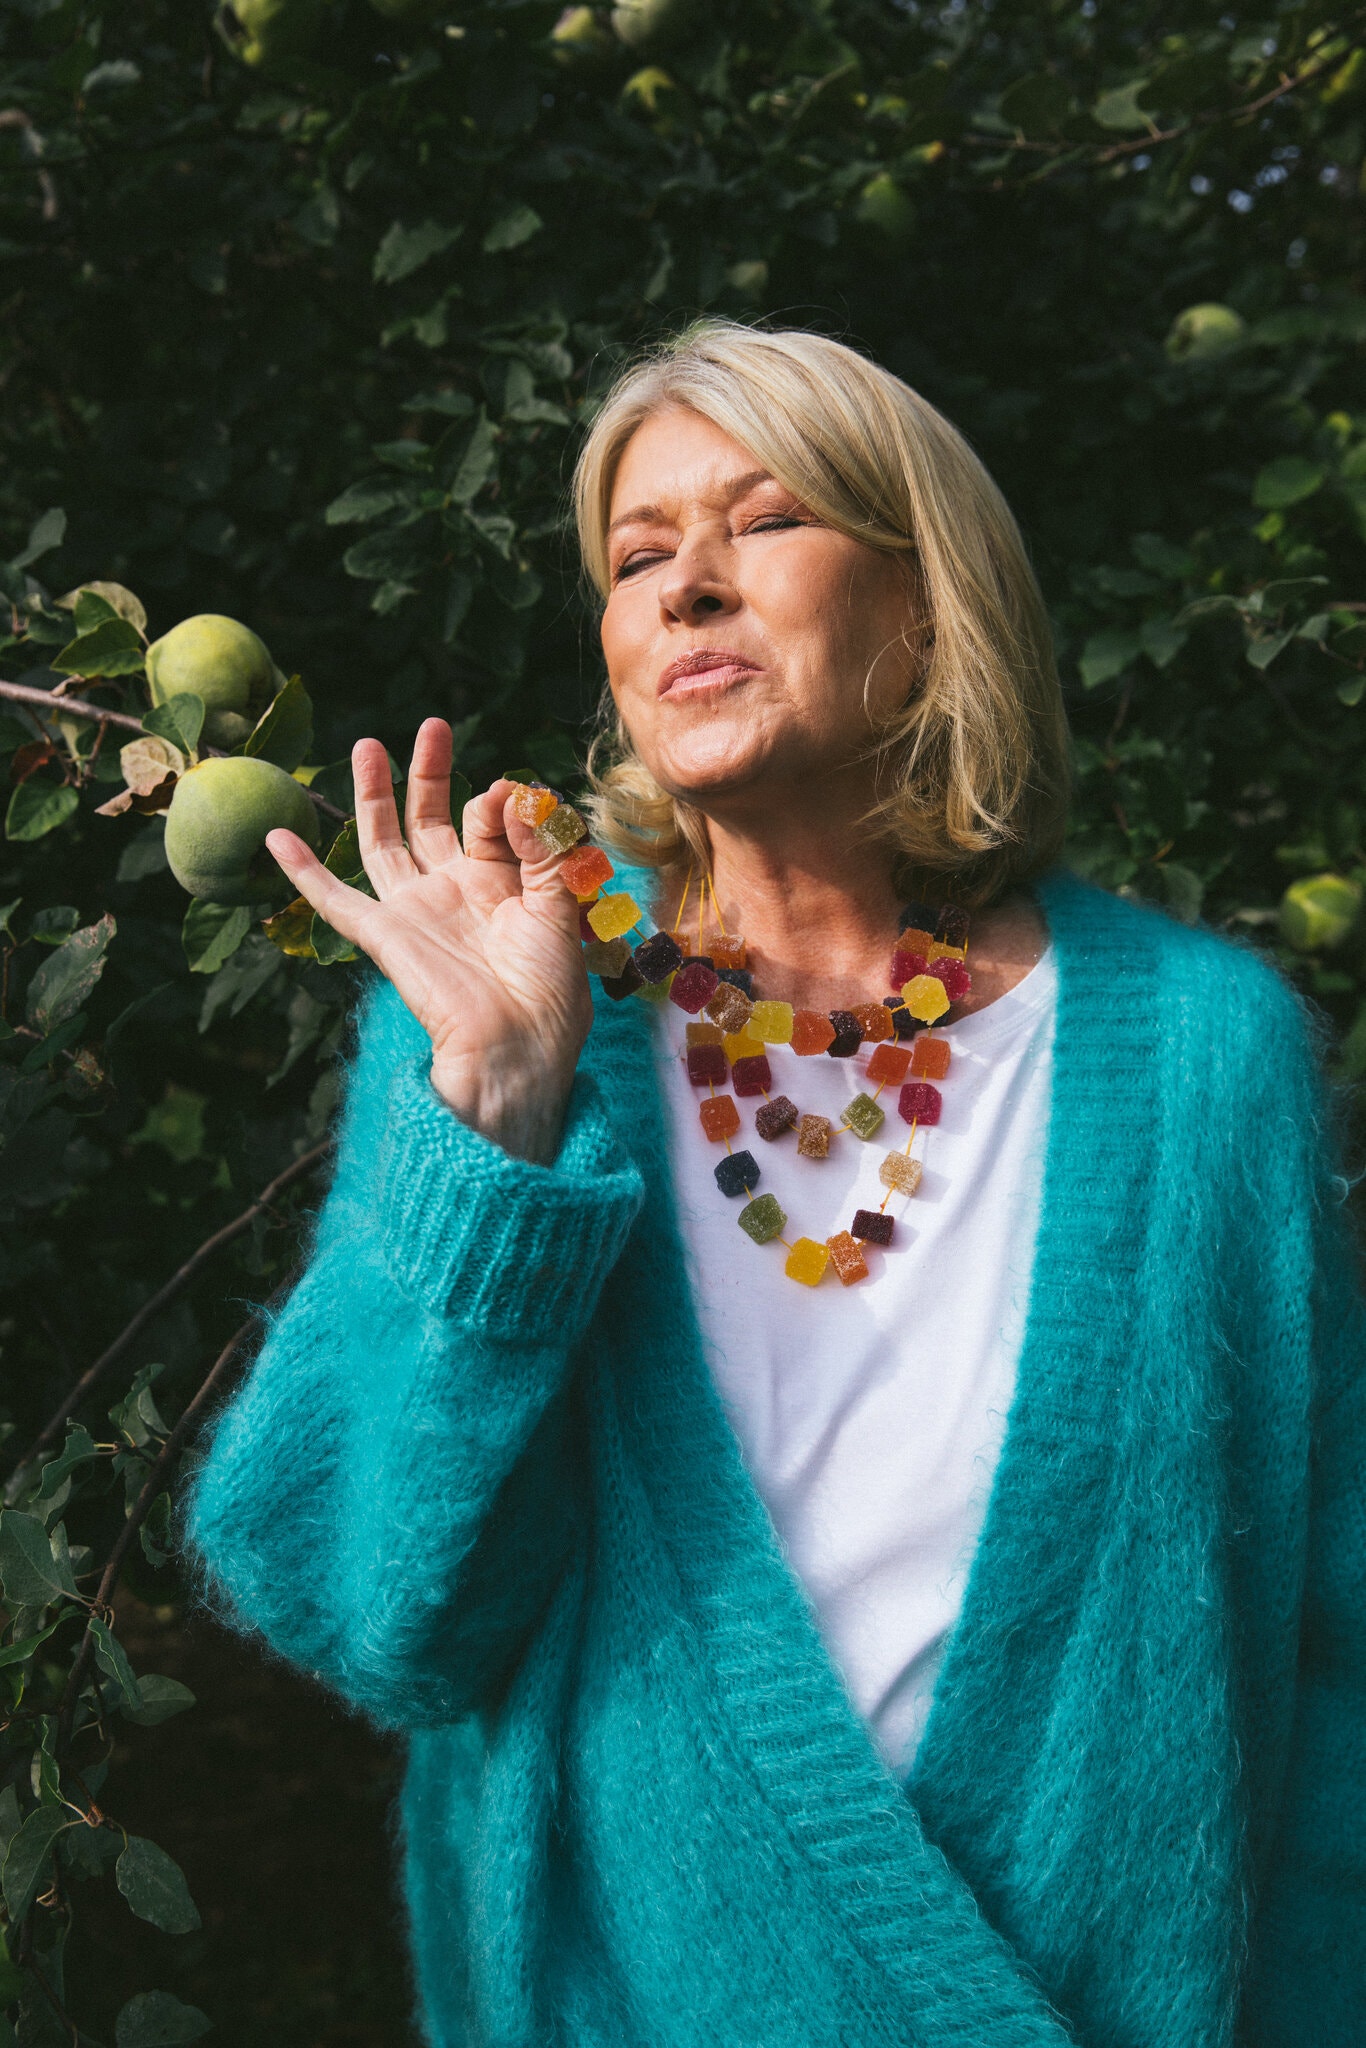 Source: "Martha Stewart, Blissed Out on CBD, Is Doing Just Fine" Sheila Maricar, 17th September 2020 (The New York Times).